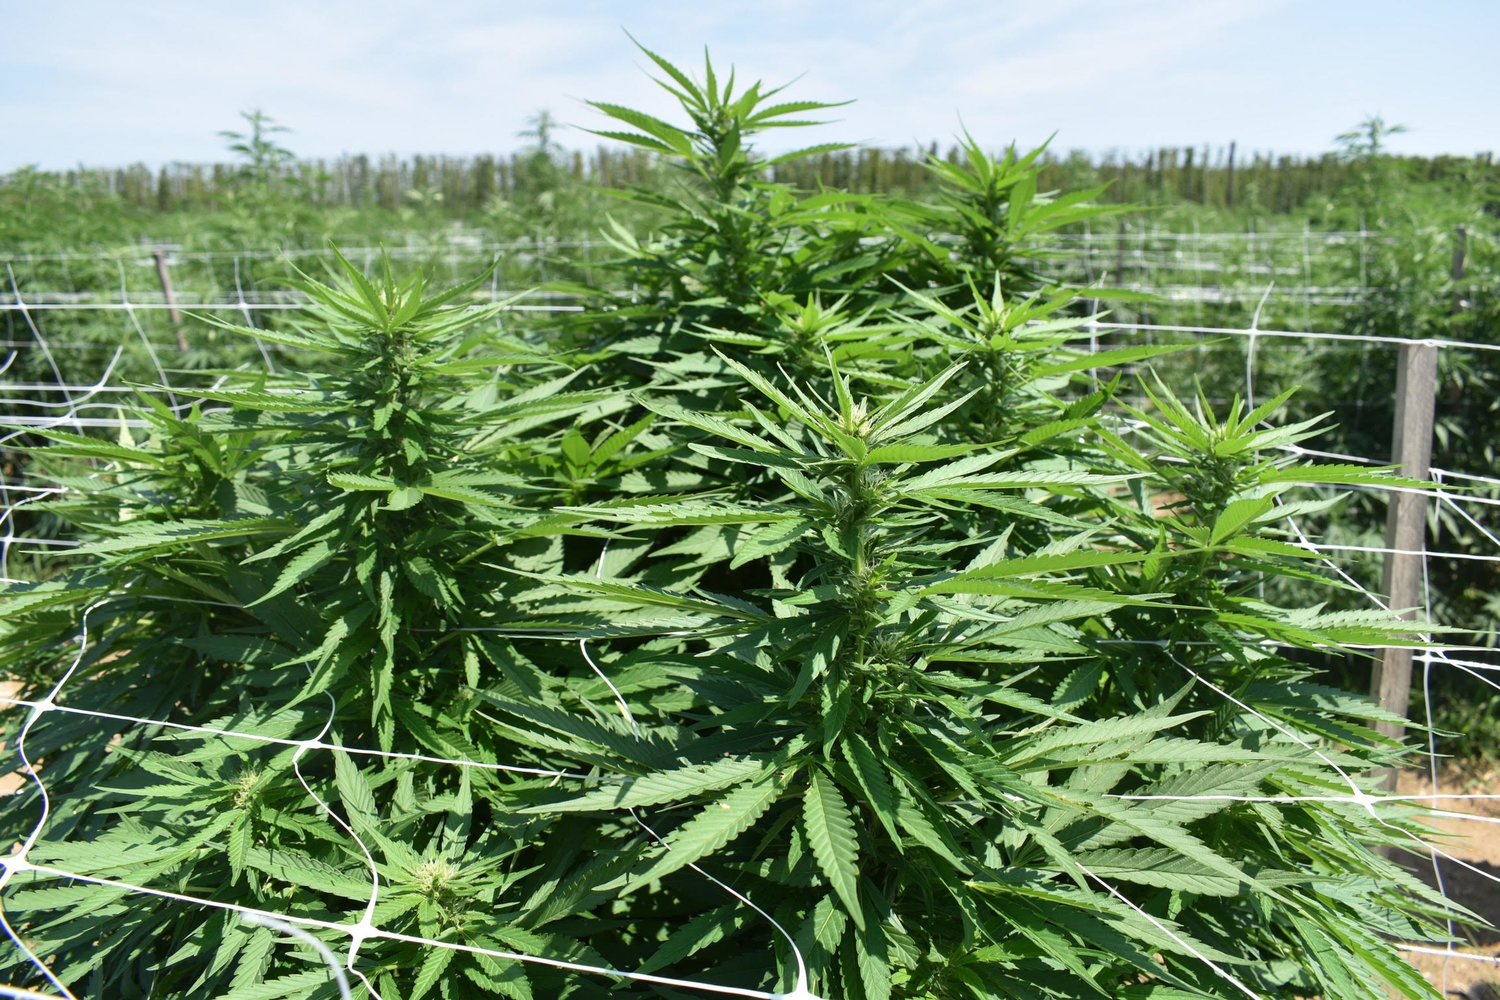 The hemp plant is identical in appearance to the marijuana plant. The difference is that a hemp plant contains 0.3 percent or less THC and a marijuana plant contains more. According to Mark Carroll, co-owner of Route 27 Hemp Yard: “Marijuana and hemp plants are identical in appearance, but the genetics are different. It would be impossible to tell them apart.”